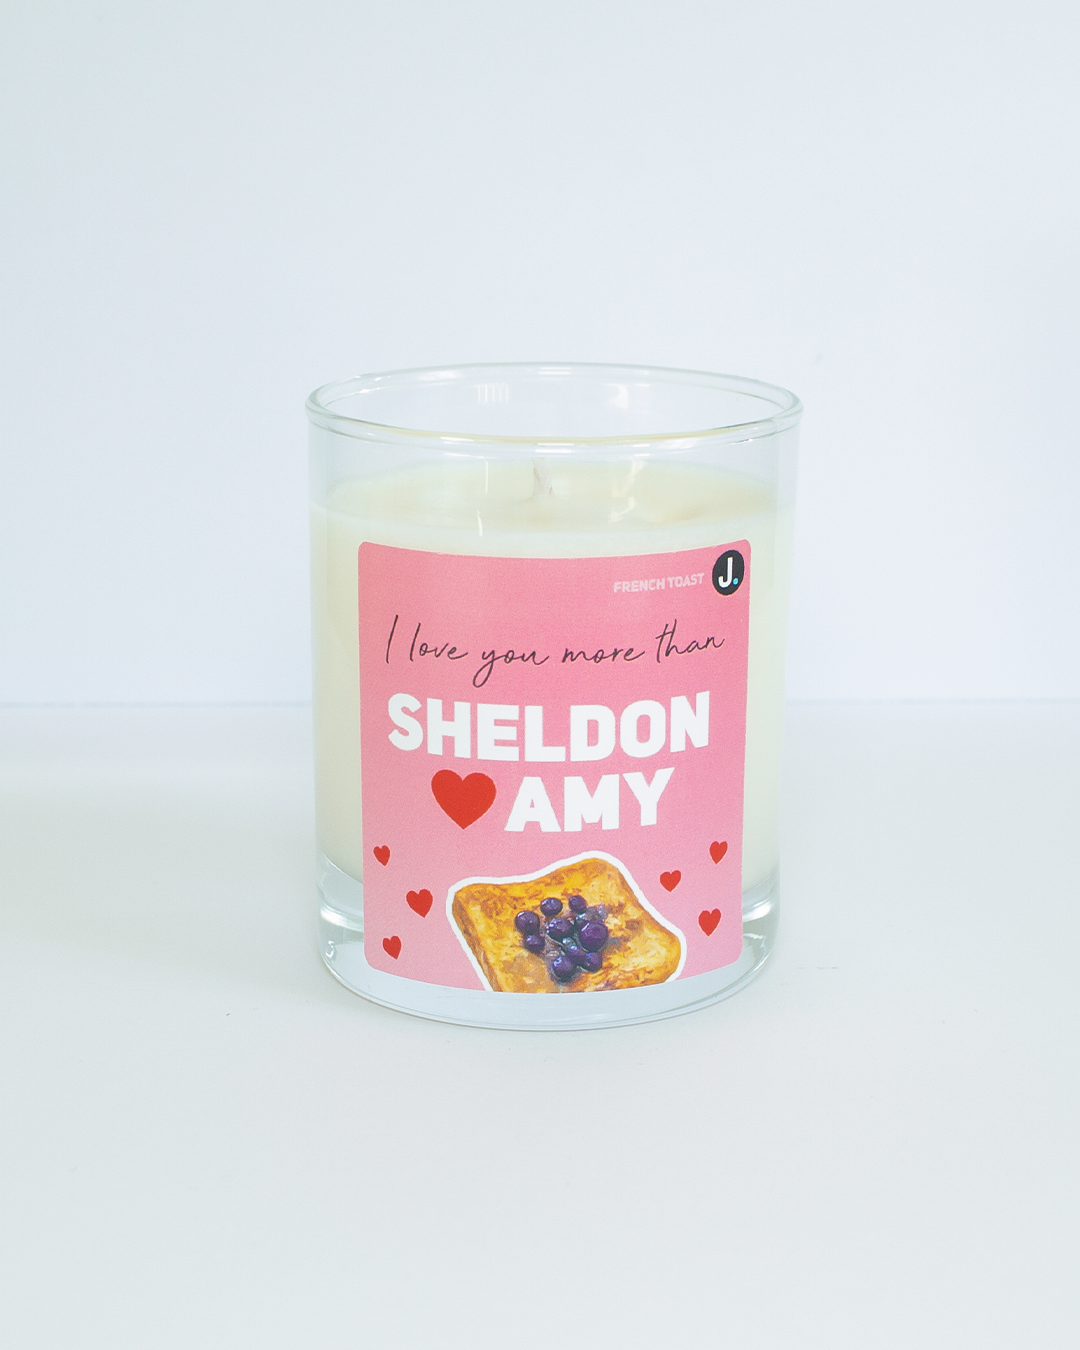 French Toast Scented Candle - Sheldon & Amy (Cinnamon French Toast) - The Big Bang Theory Inspired Candle